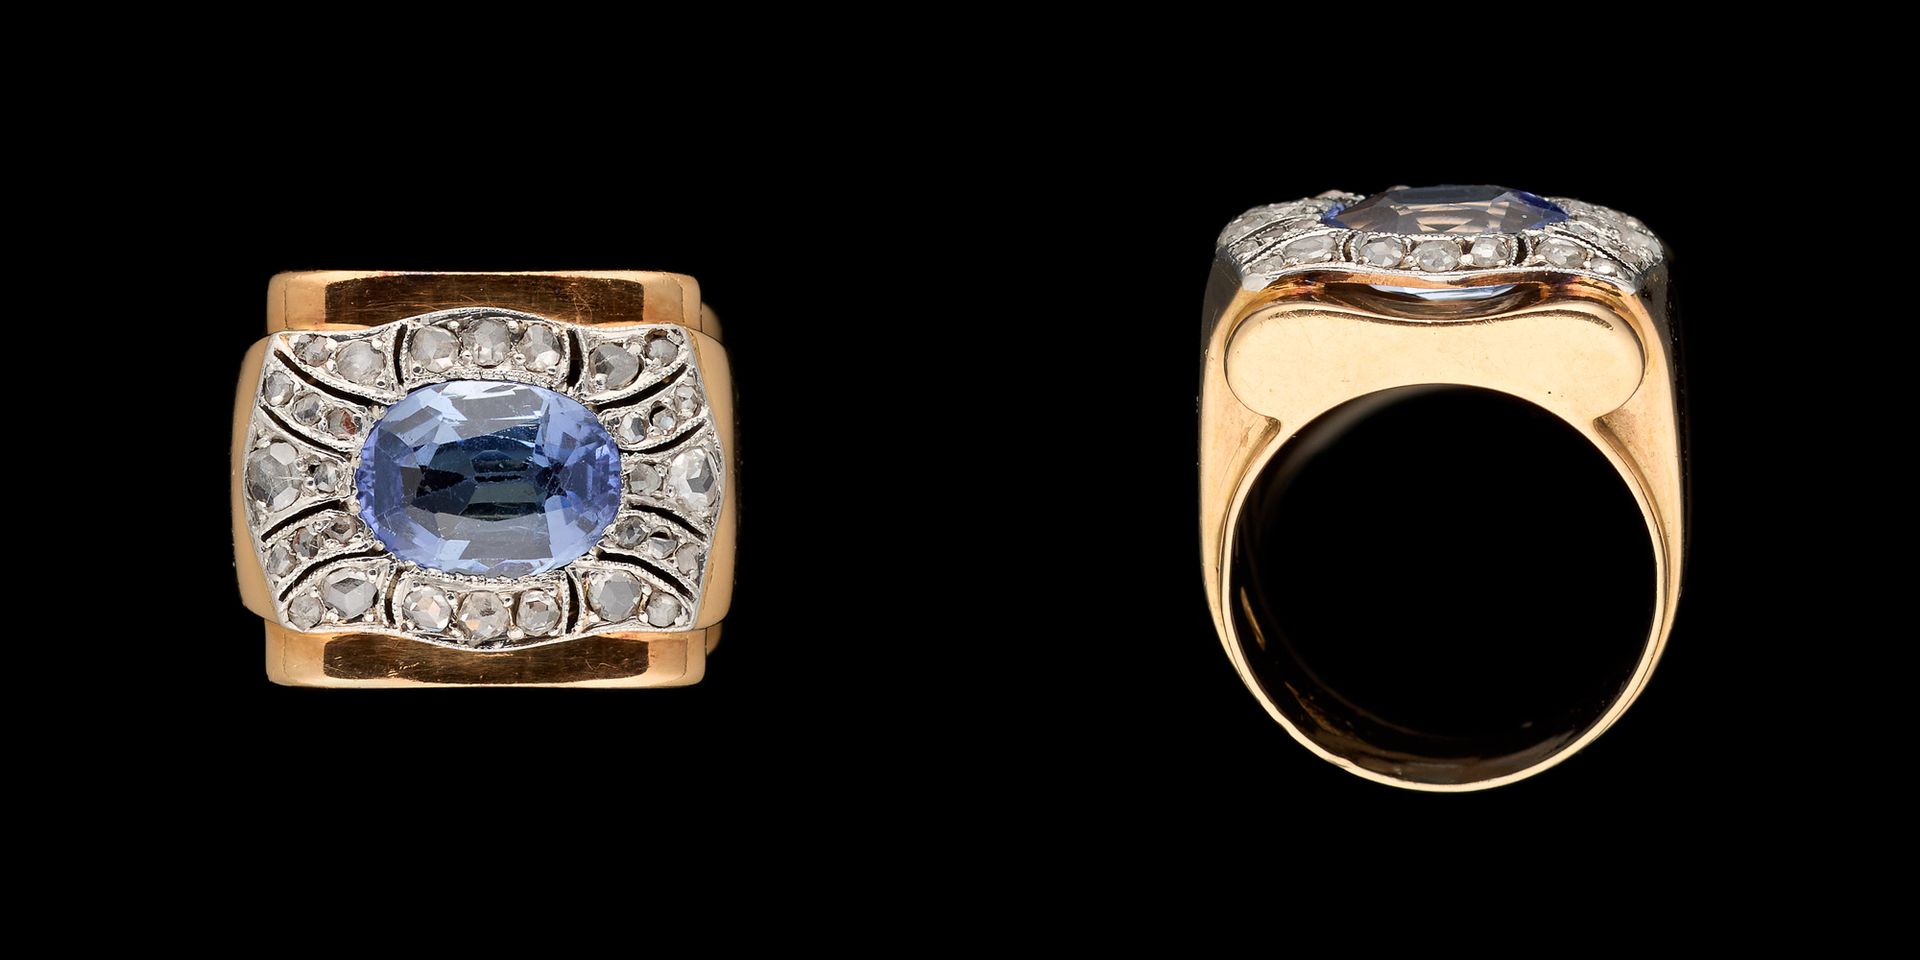 Circa 1950. Jewel: Yellow gold and platinum ring set with a Ceylon sapphire of +&hellip;